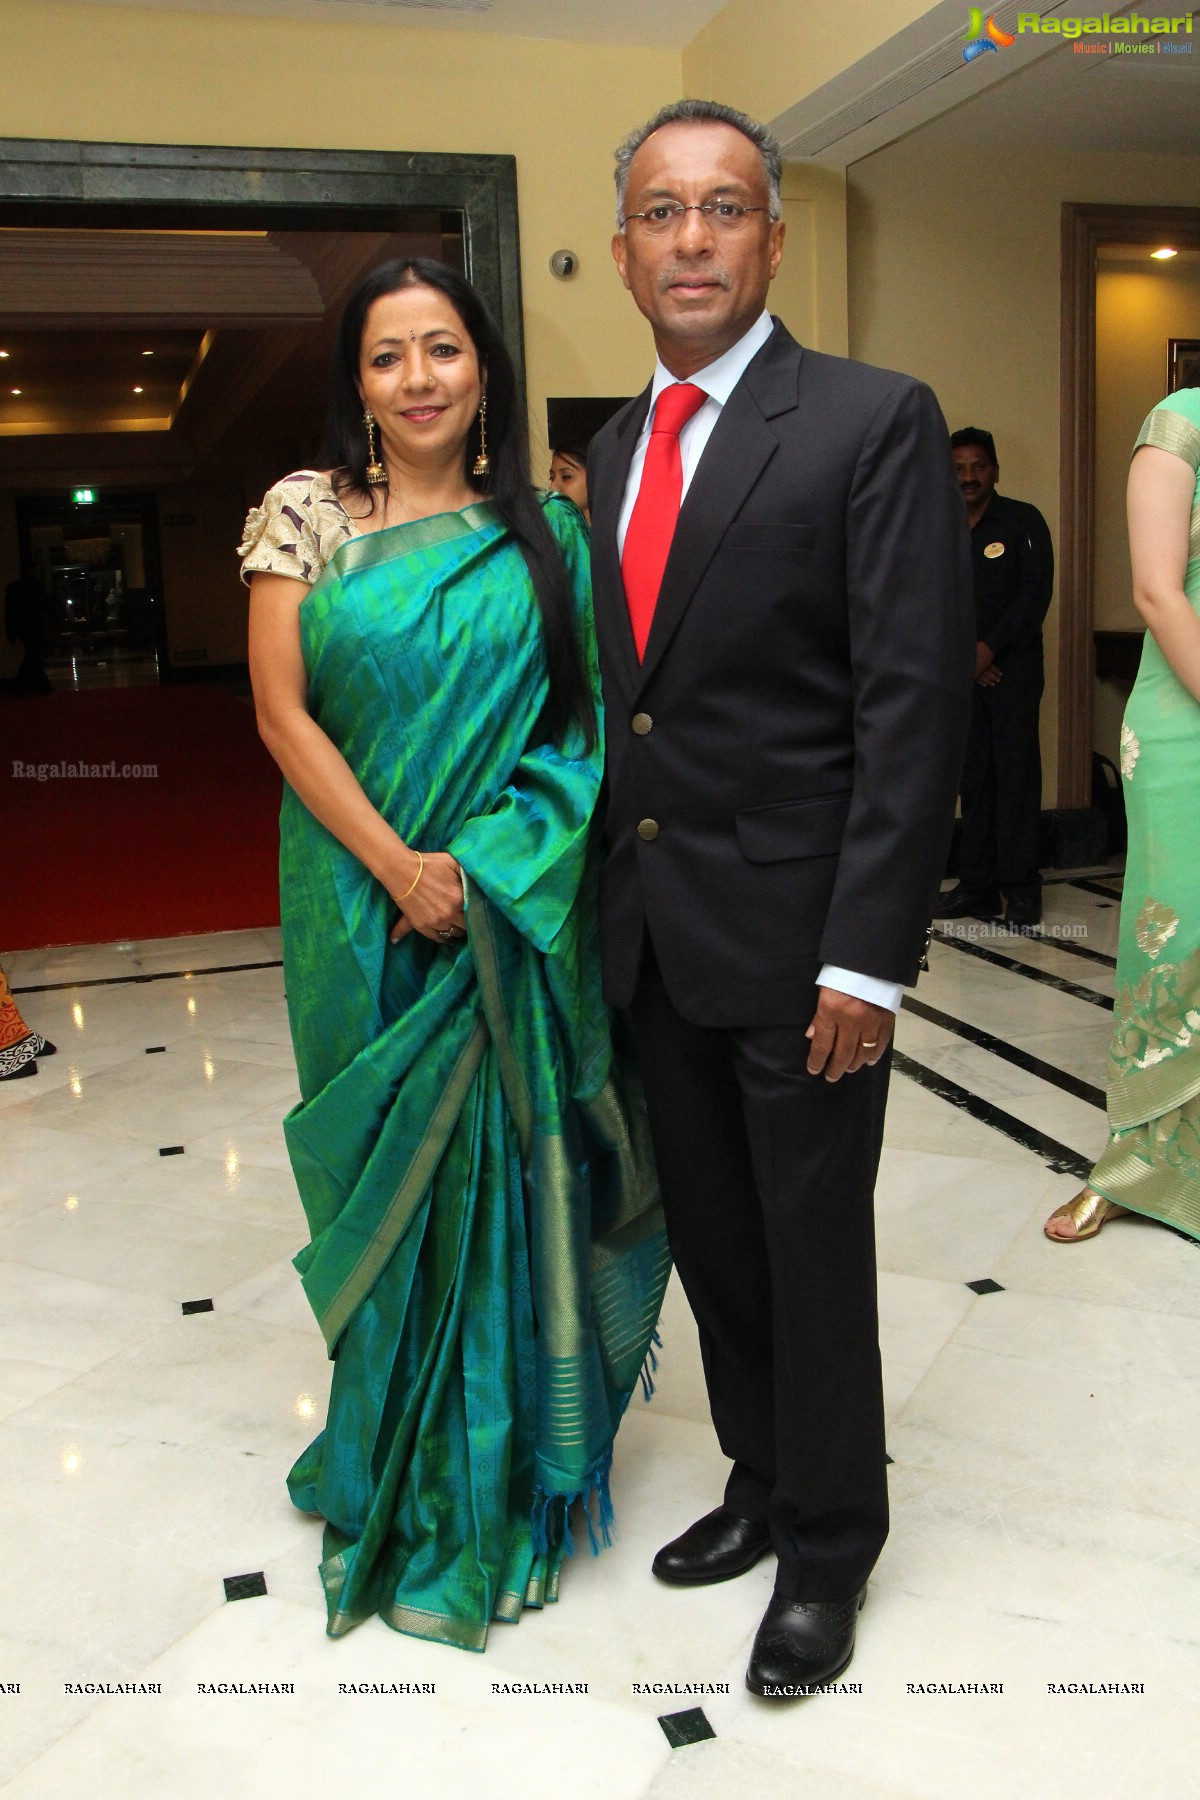 ITC Kakatiya Event - Farewell Party to George Verghese and Welcome Party to N Krishnan